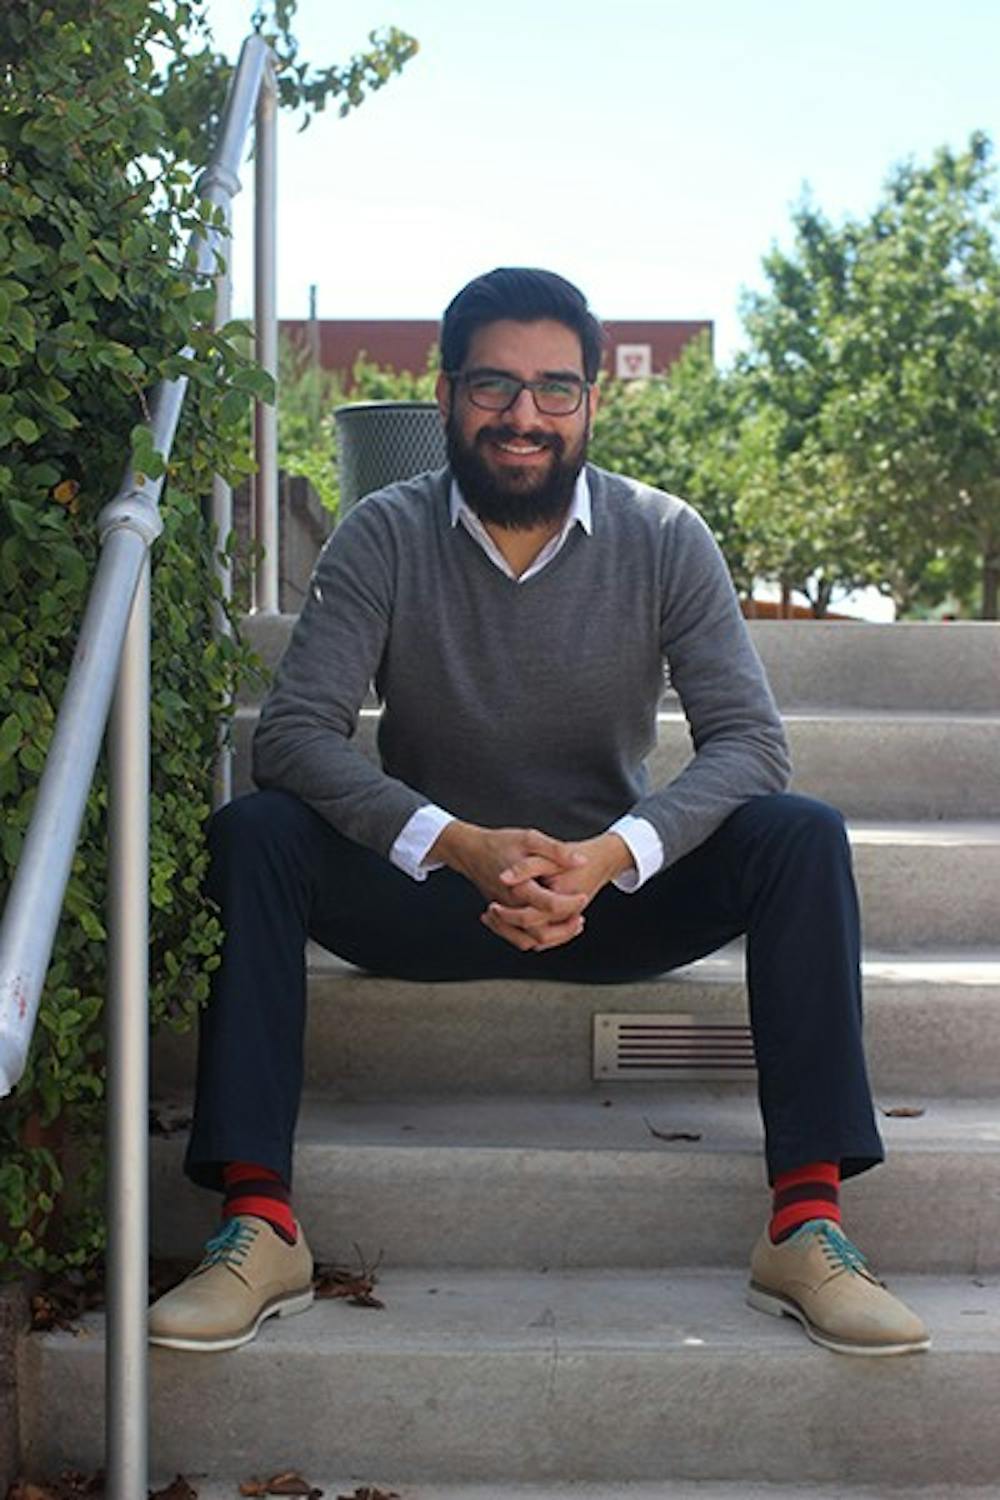 Mastering in social justice and human rights, Carlos Perez launched Directus International, a platform for advocacy and fight for social justice in the United States and across the world. (Photo by Katie Malles)